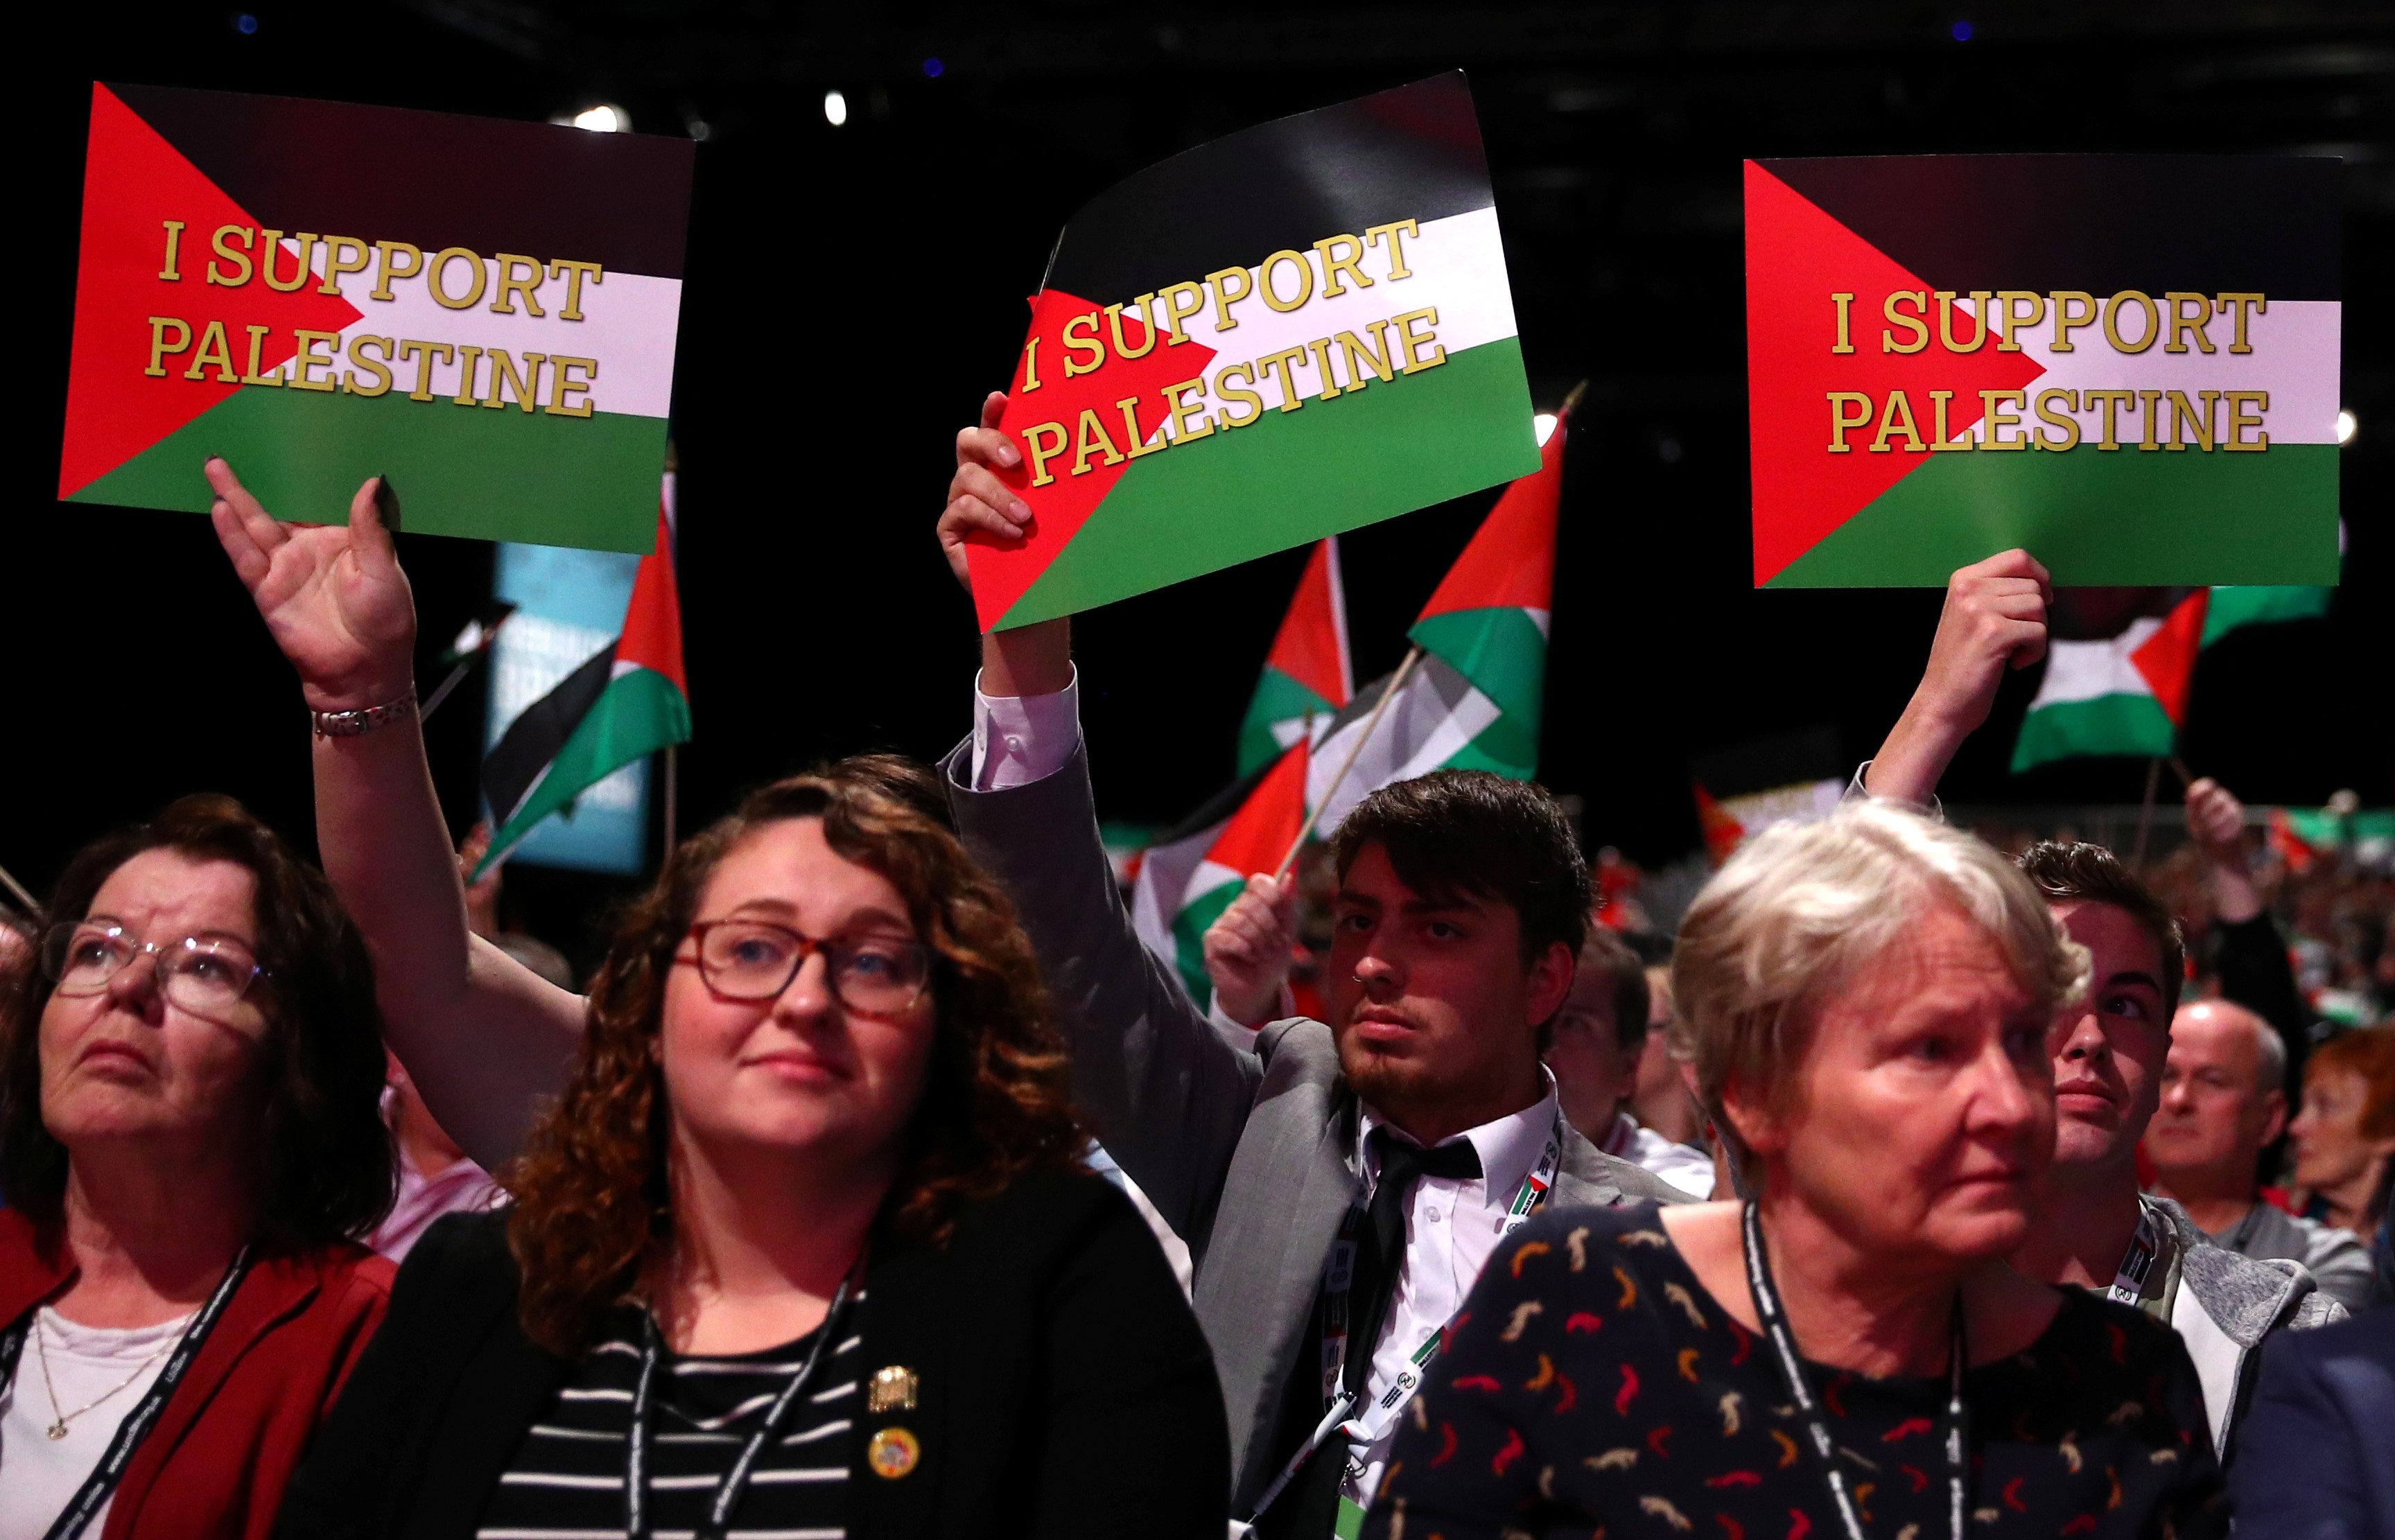 Delegates hold up placards in support of Palestine at the Labour Party's conference in Liverpool, Britain, September 25, 2018. REUTERS/